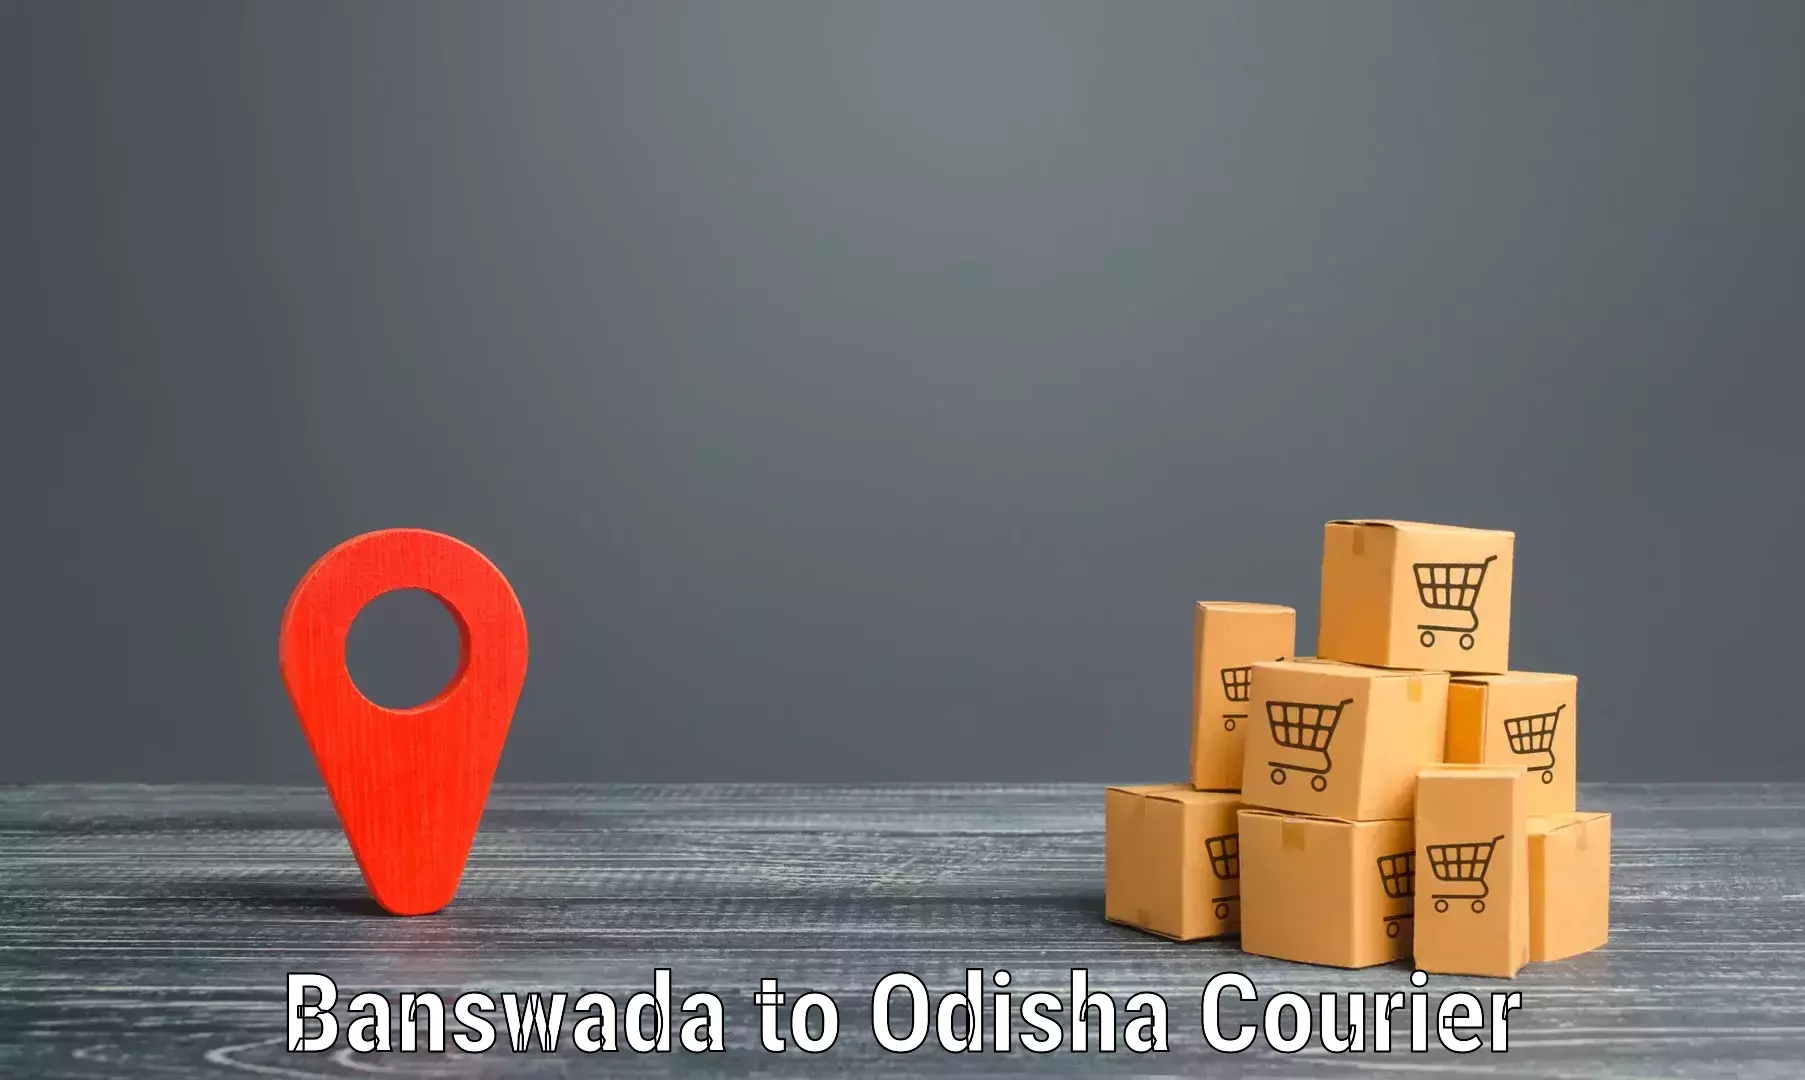 Same-day delivery solutions in Banswada to Chandipur